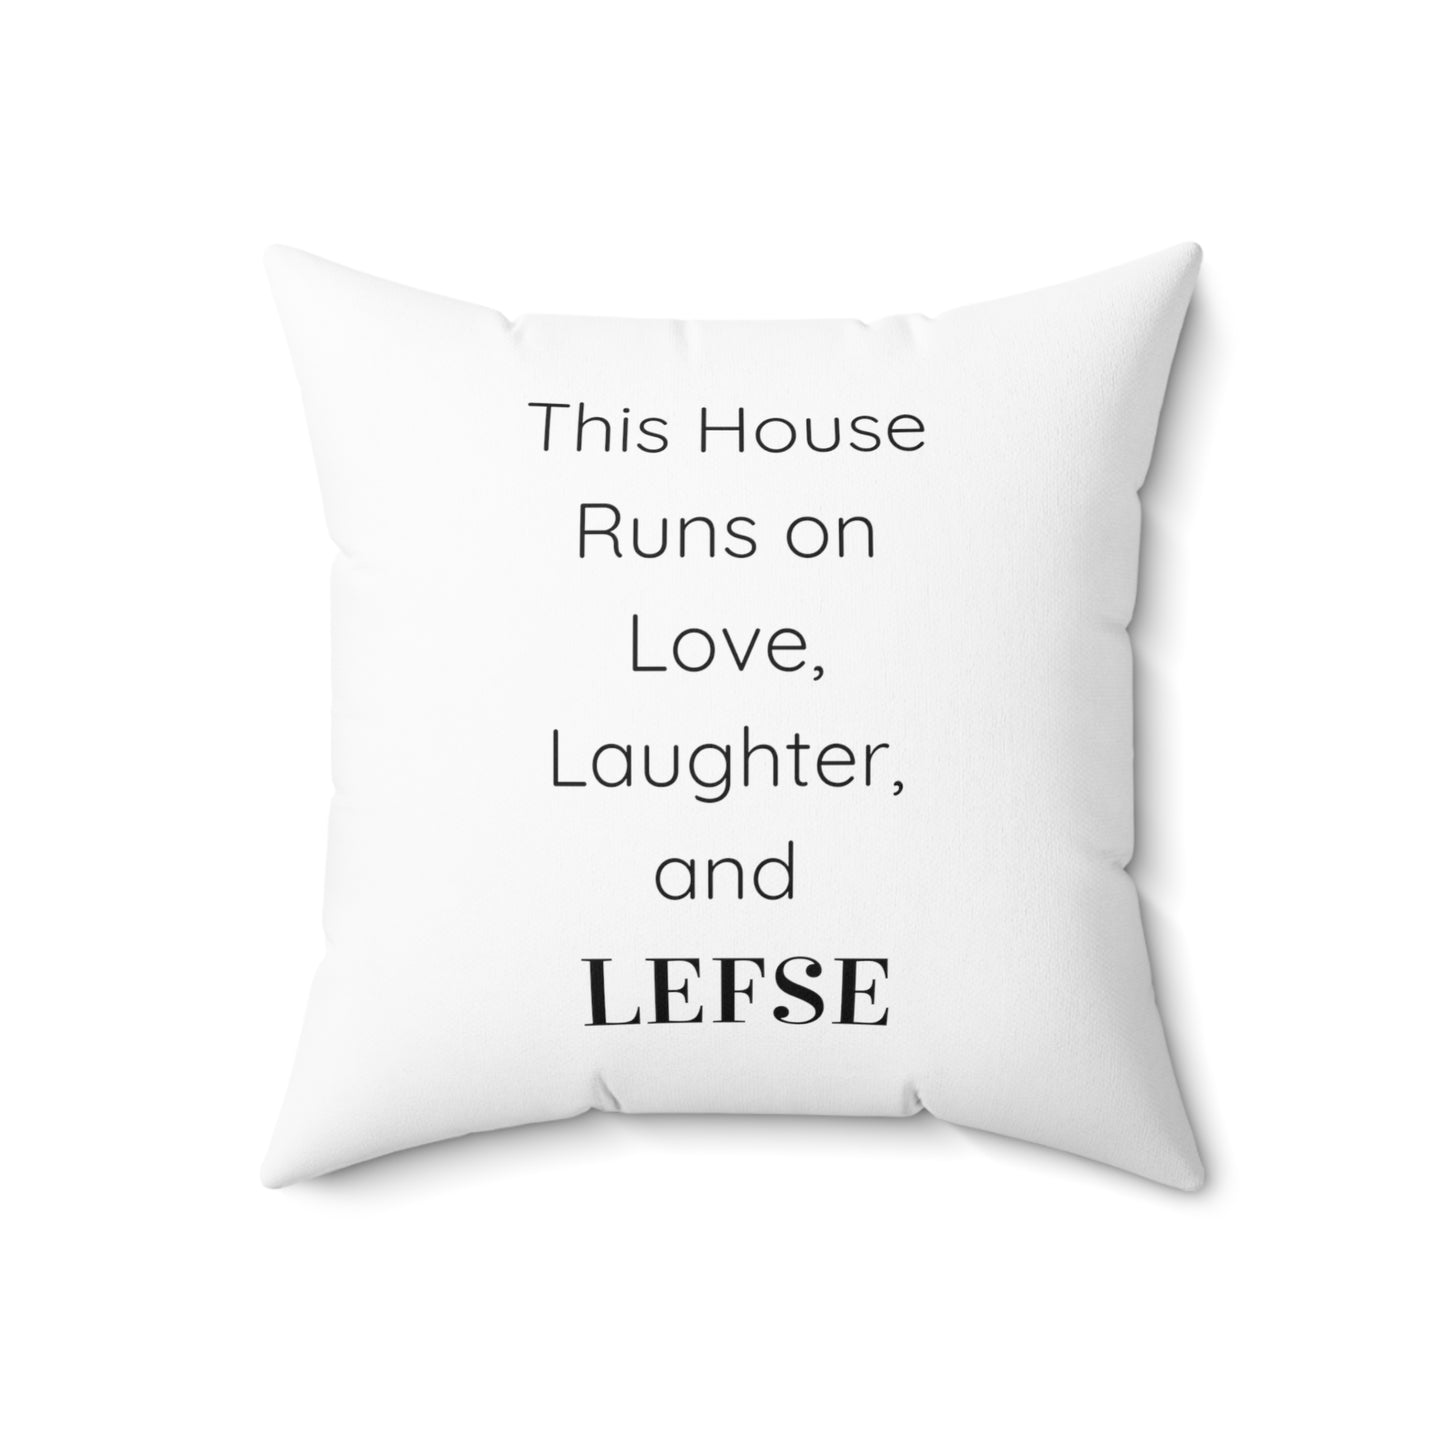 This House Runs on Laughter and Lefse Pillow Koselig Throw Pillow Norwegian Home Decor Housewarming Gift Faux Suede Koselig Pillow Norway